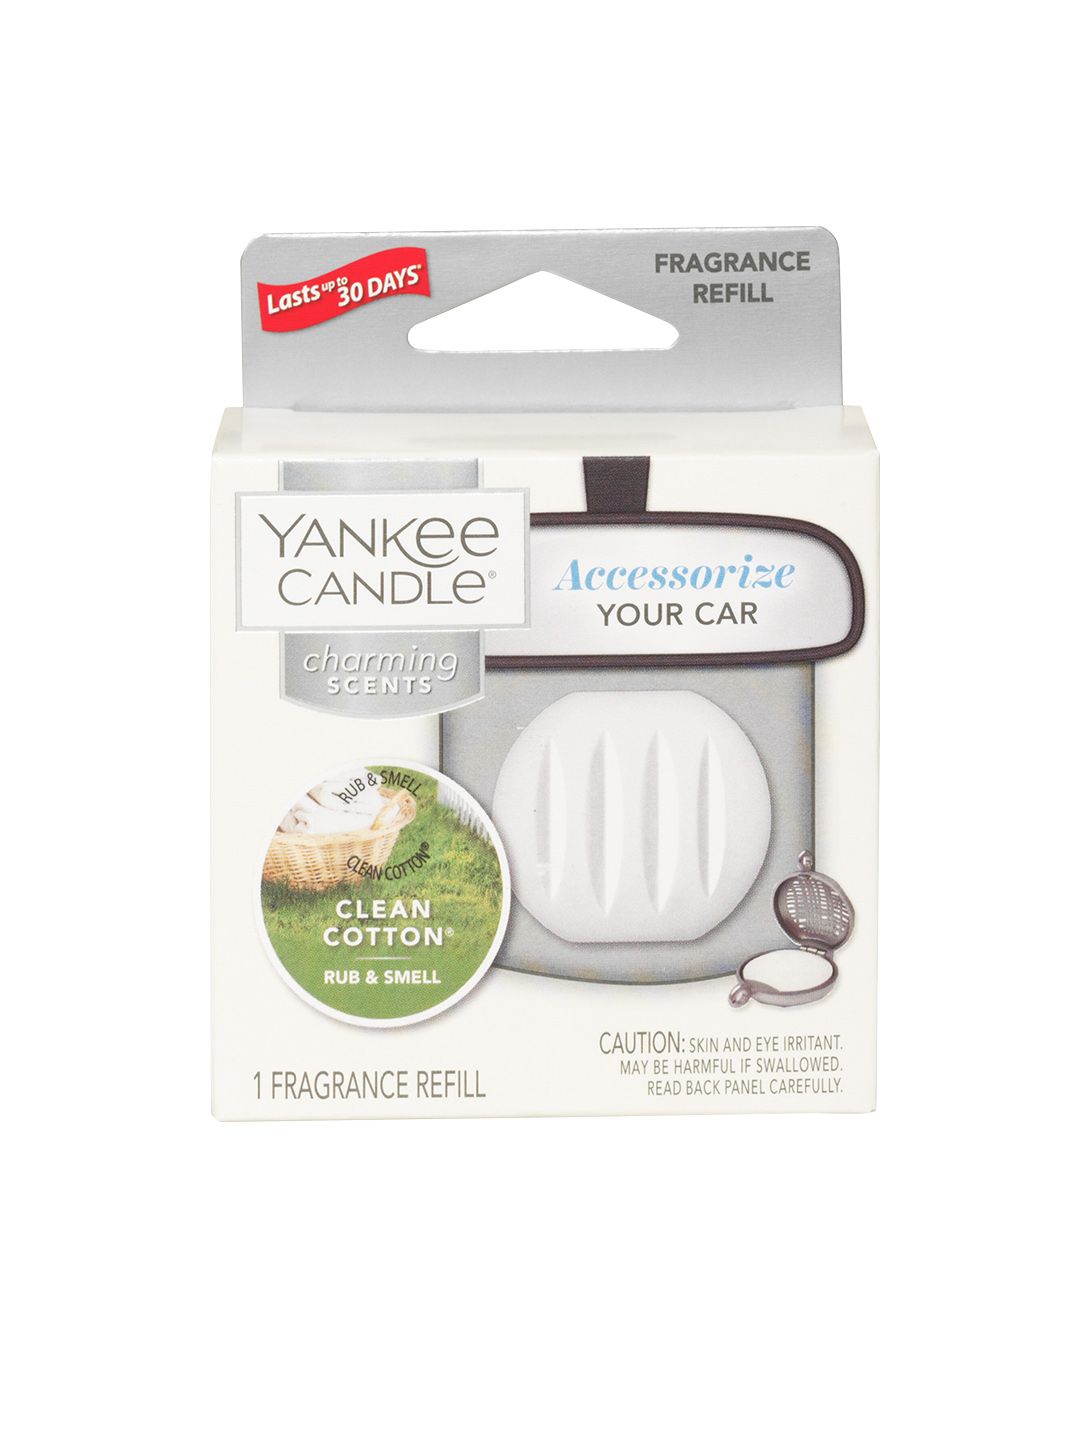 YANKEE CANDLE Charming Scents Fragrance Clean Cotton Car Air Freshener Refill Price in India